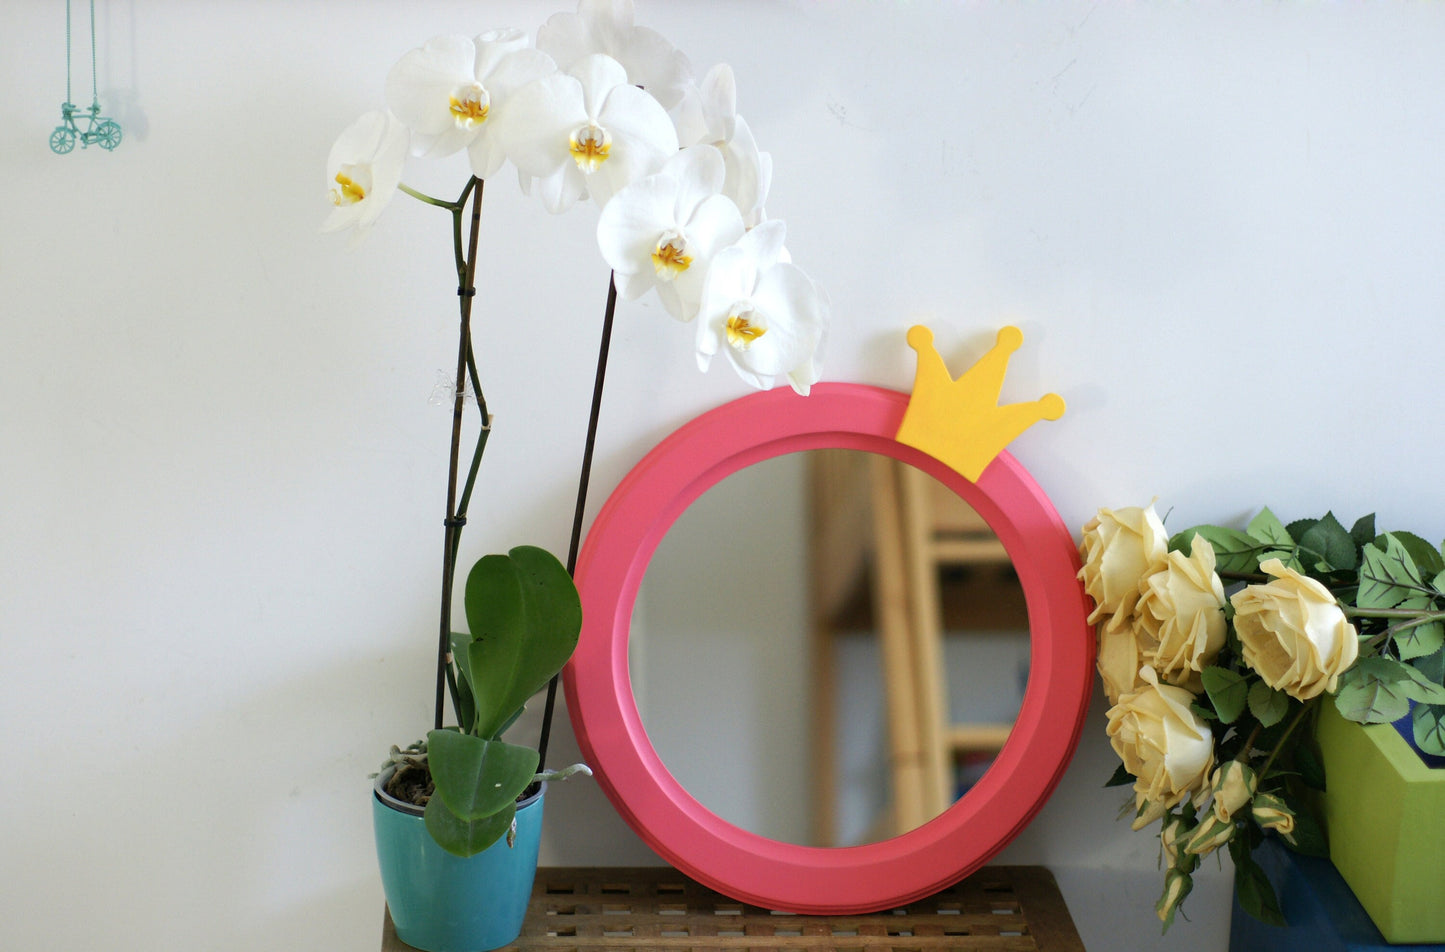 Pink frame mirror for girls, Childrens mirror for baby, Mirror with crown for kids room, Unique wood frame mirror, Candy mirror with crown